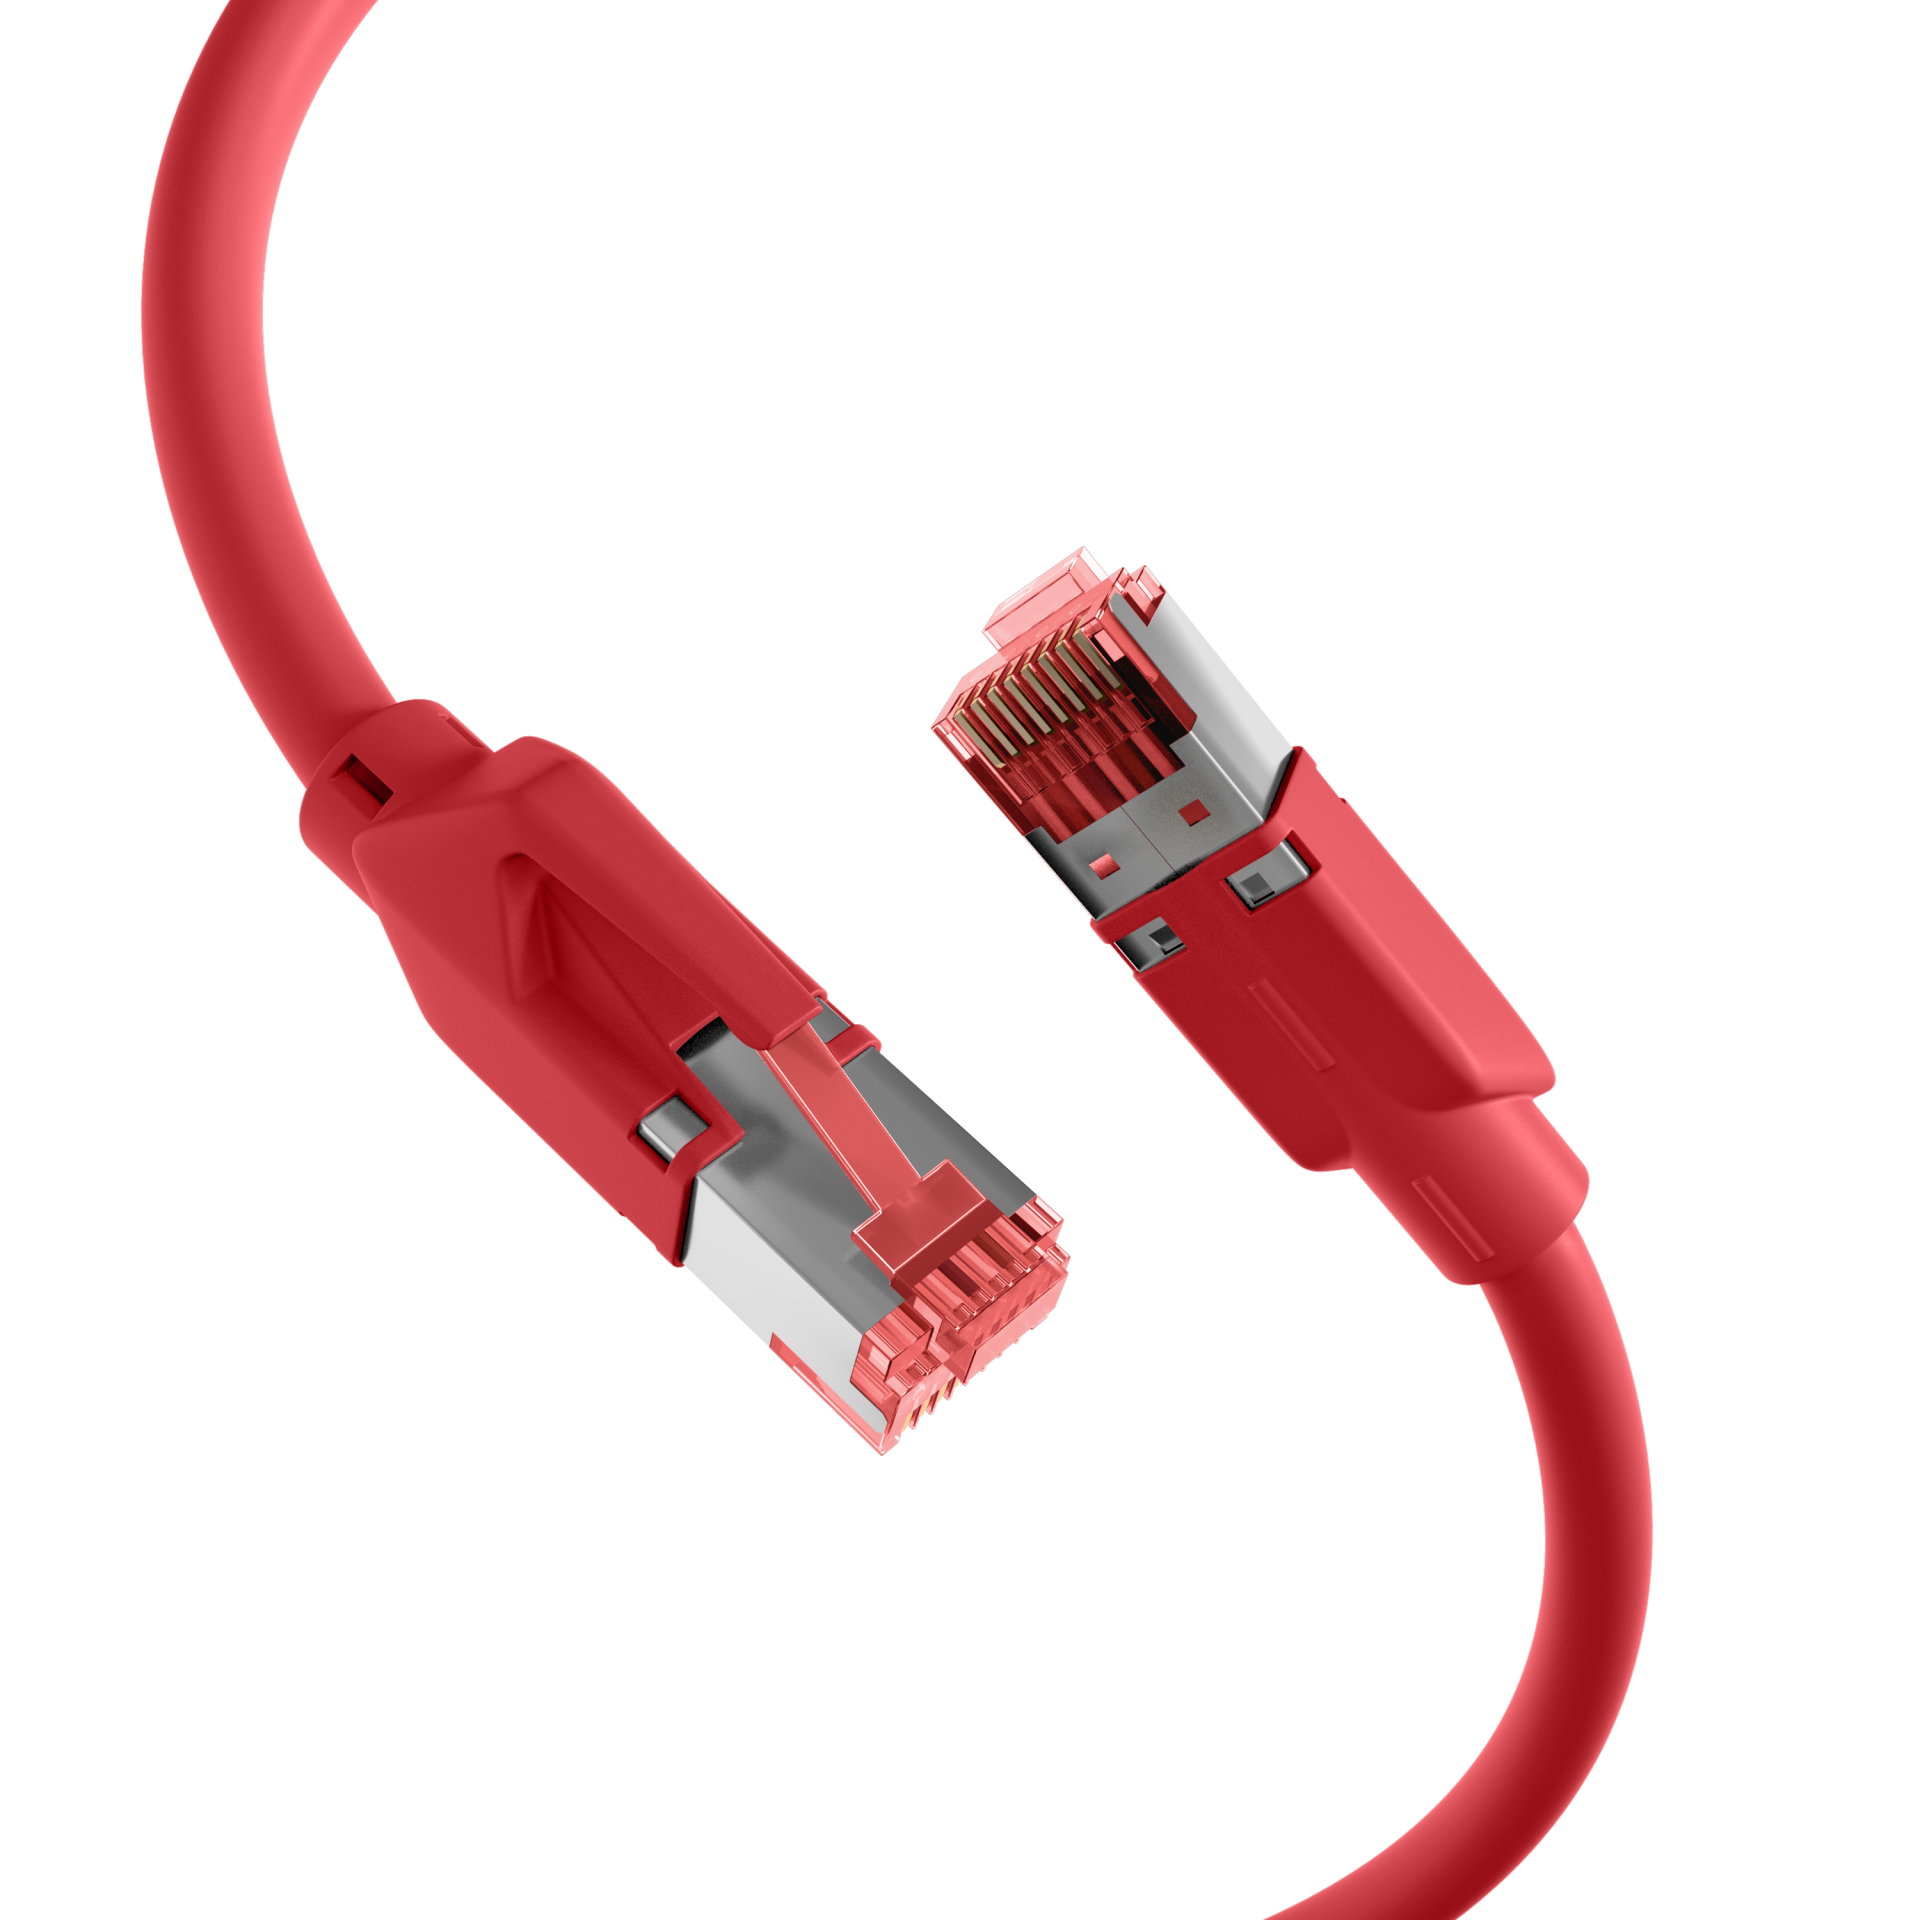 RJ45 Patch Cord Cat.6A S/FTP Dätwyler 7702 TM21 red 10m